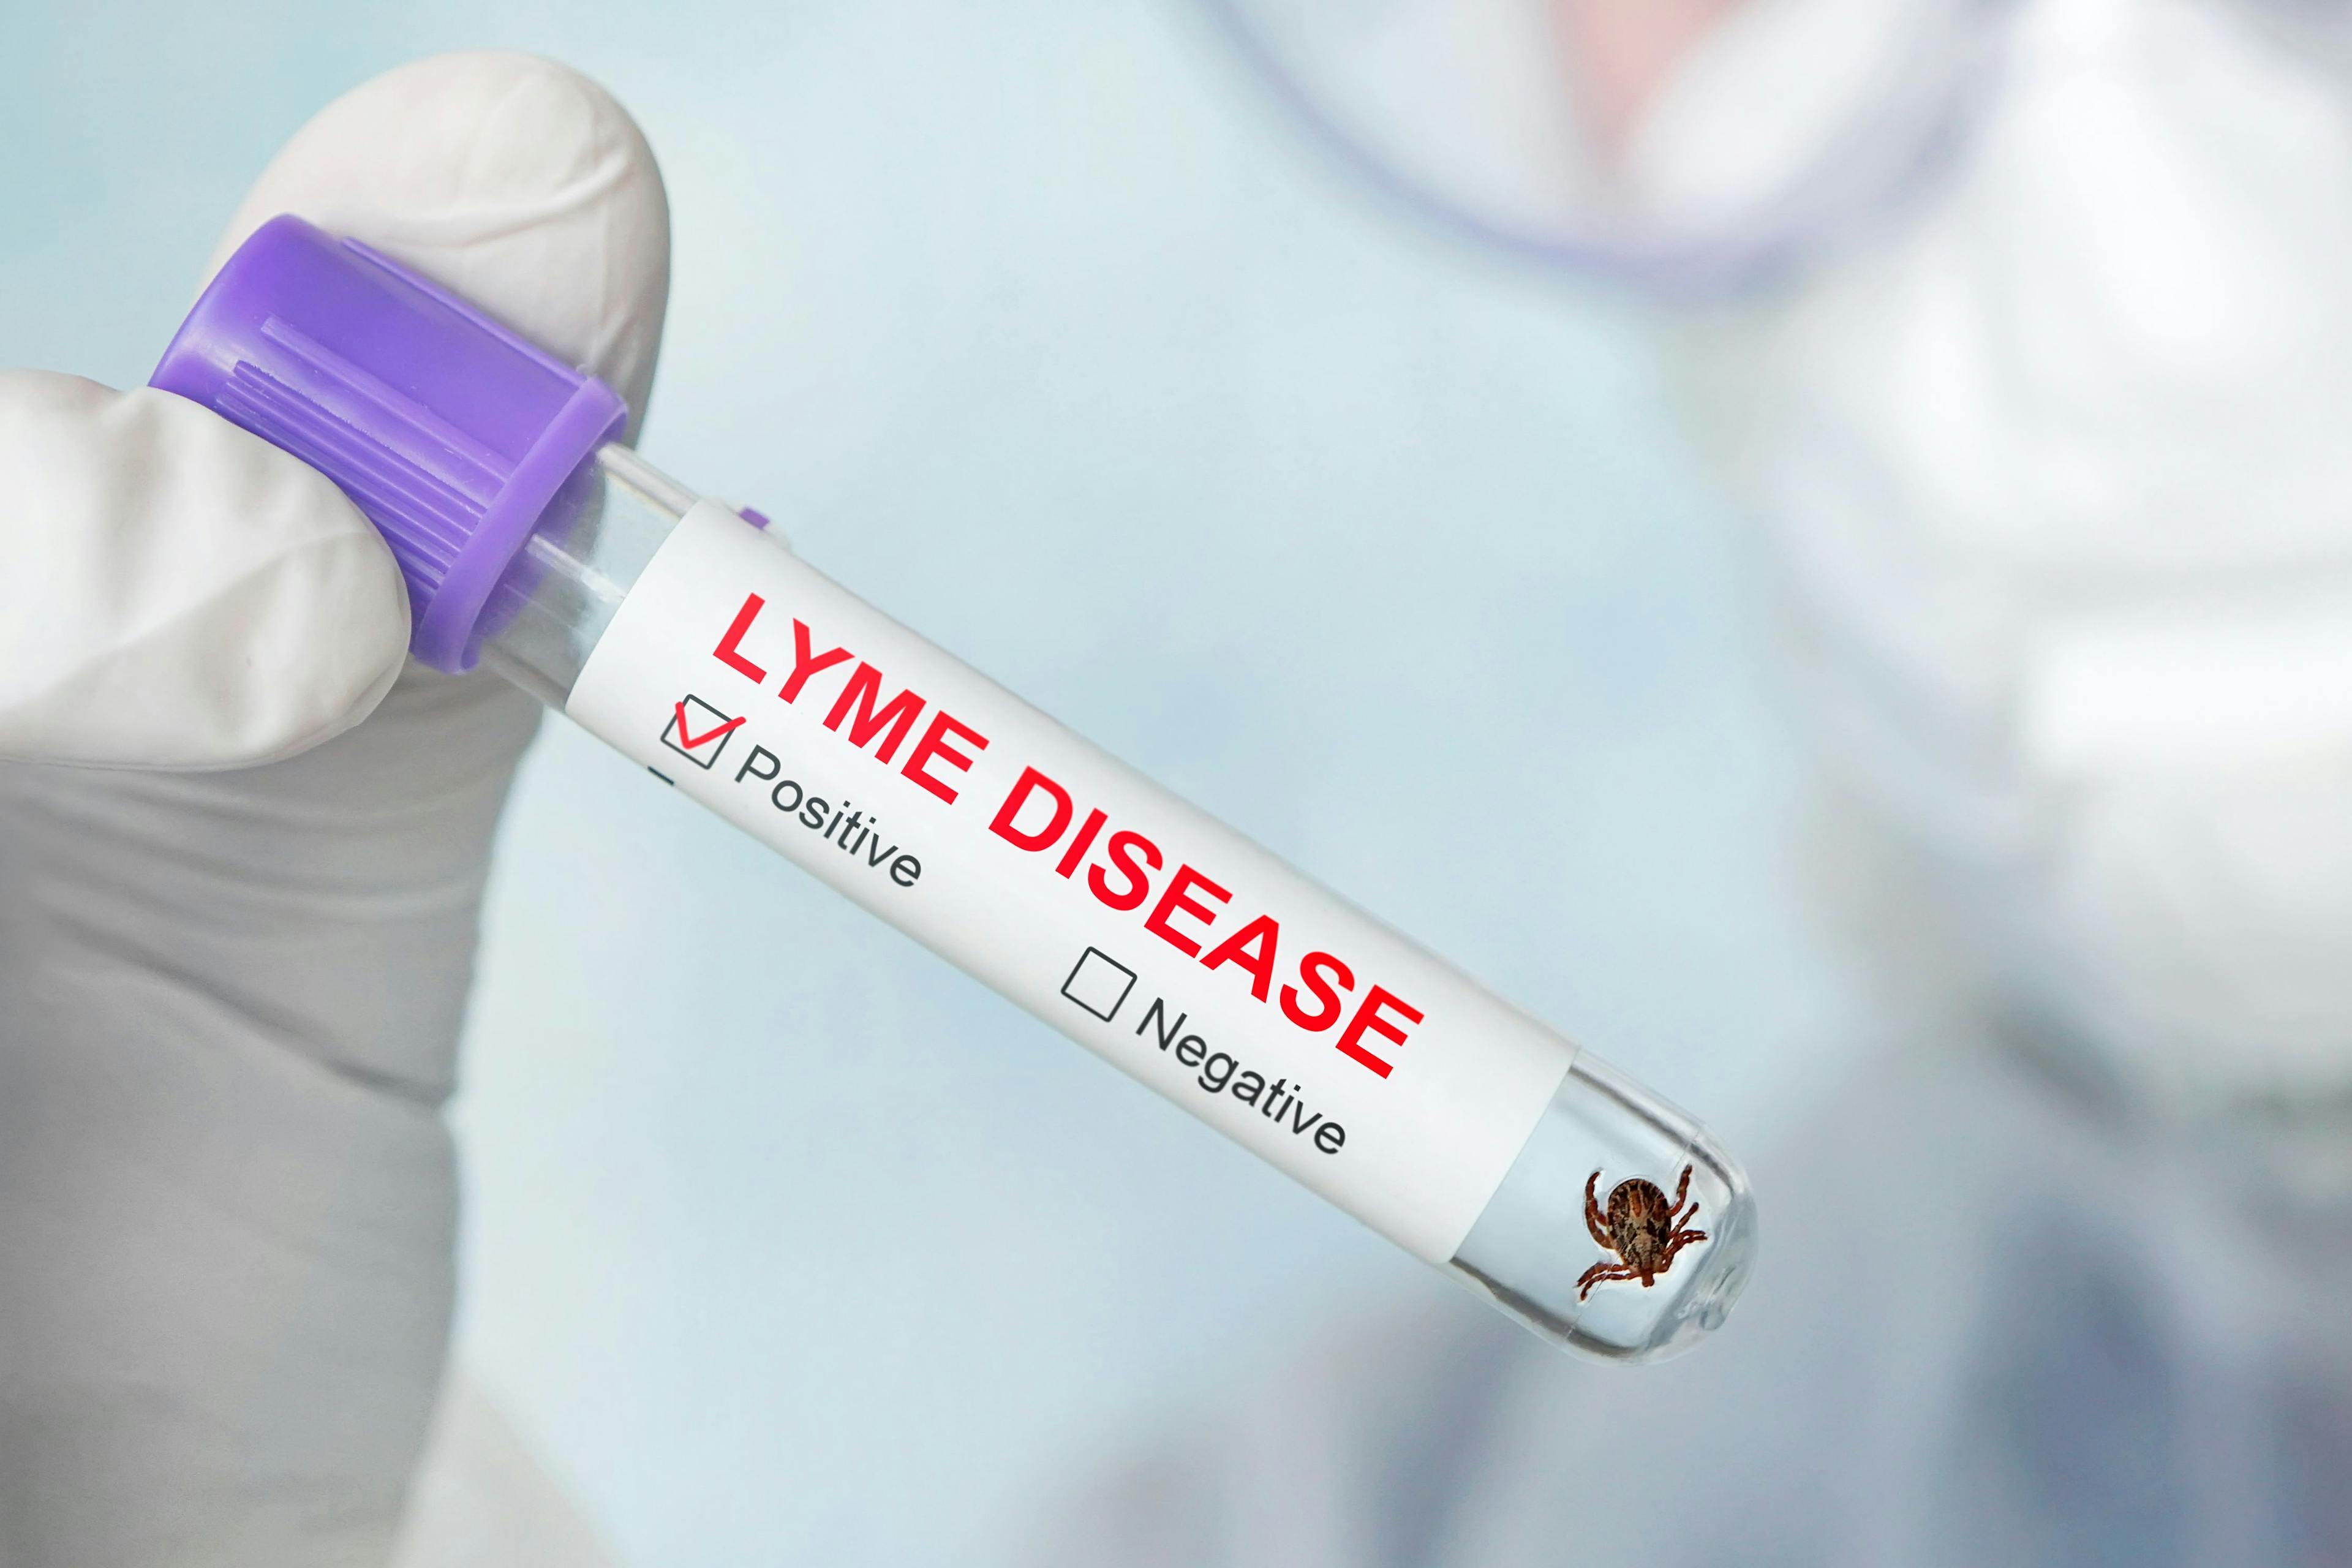 A Tufts University research time identified a novel testing method to detect Lyme disease reinfection and successful treatment.